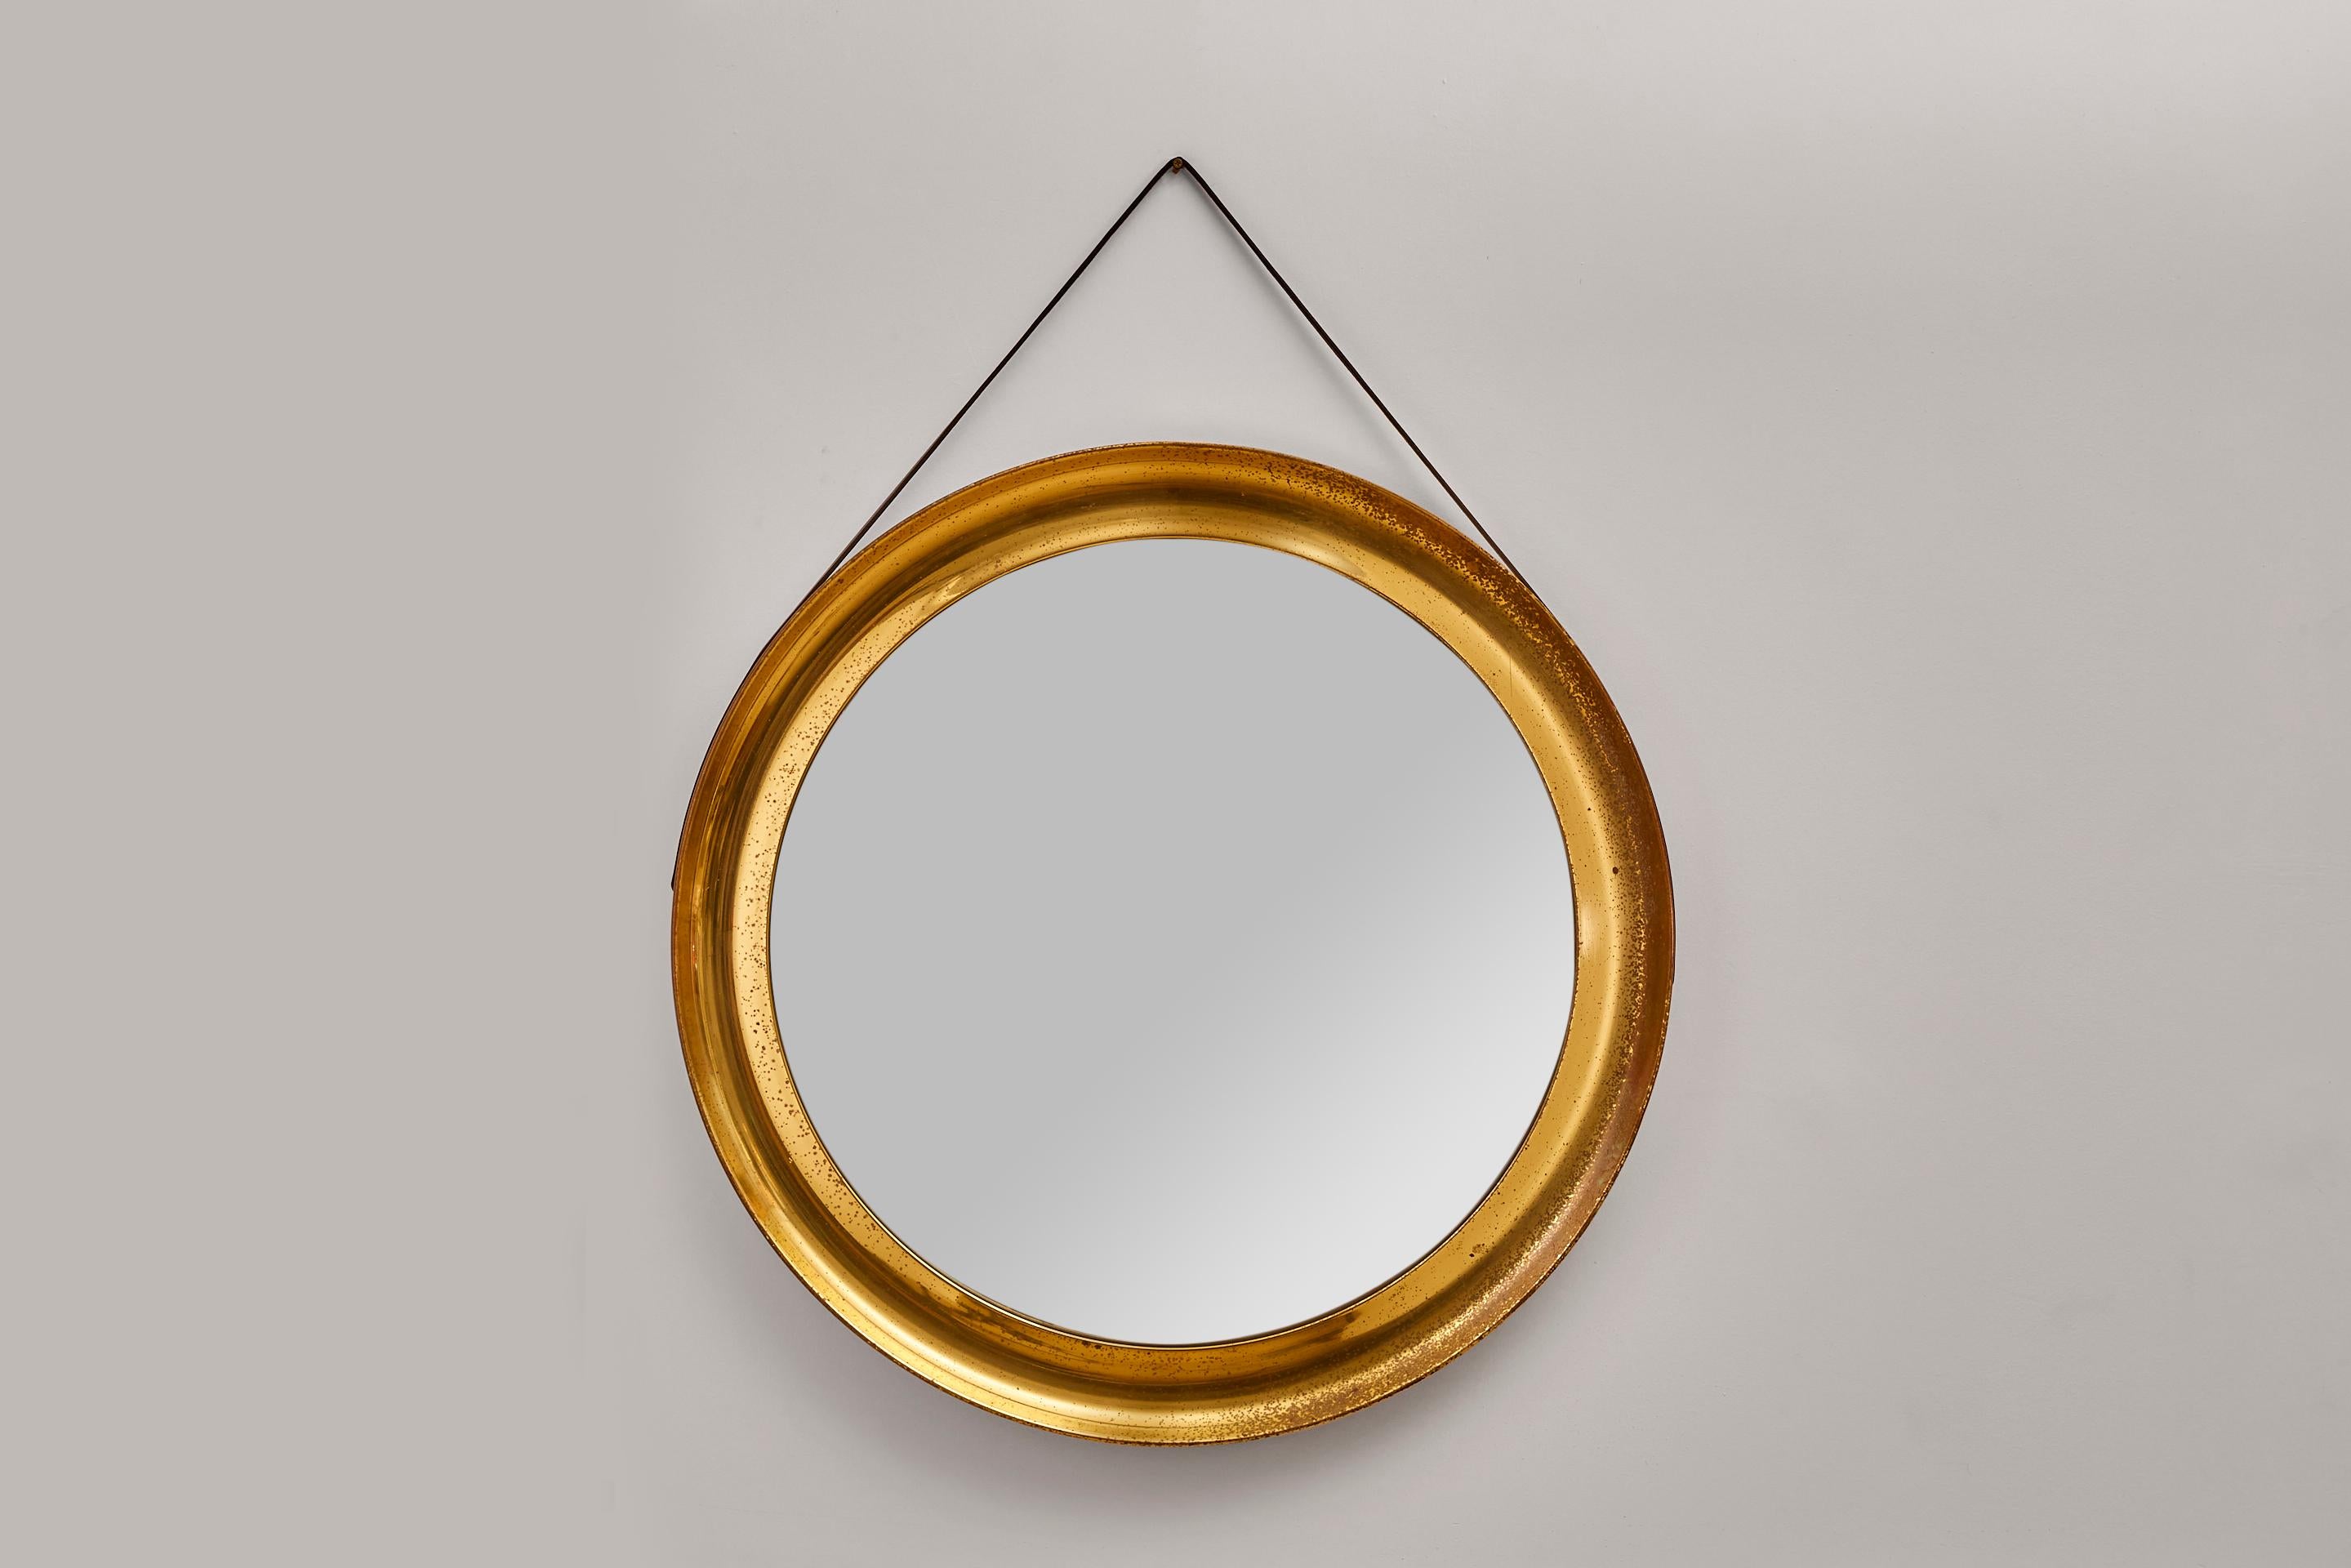 1960's Italian circular 'Narciso' mirror with a brass frame and leather strap.

Designed by Sergio Mazza for Artemide, the mirror and brass have a lovely authentic patina.

The patina around the frame elevates the beauty extenuating the vintage